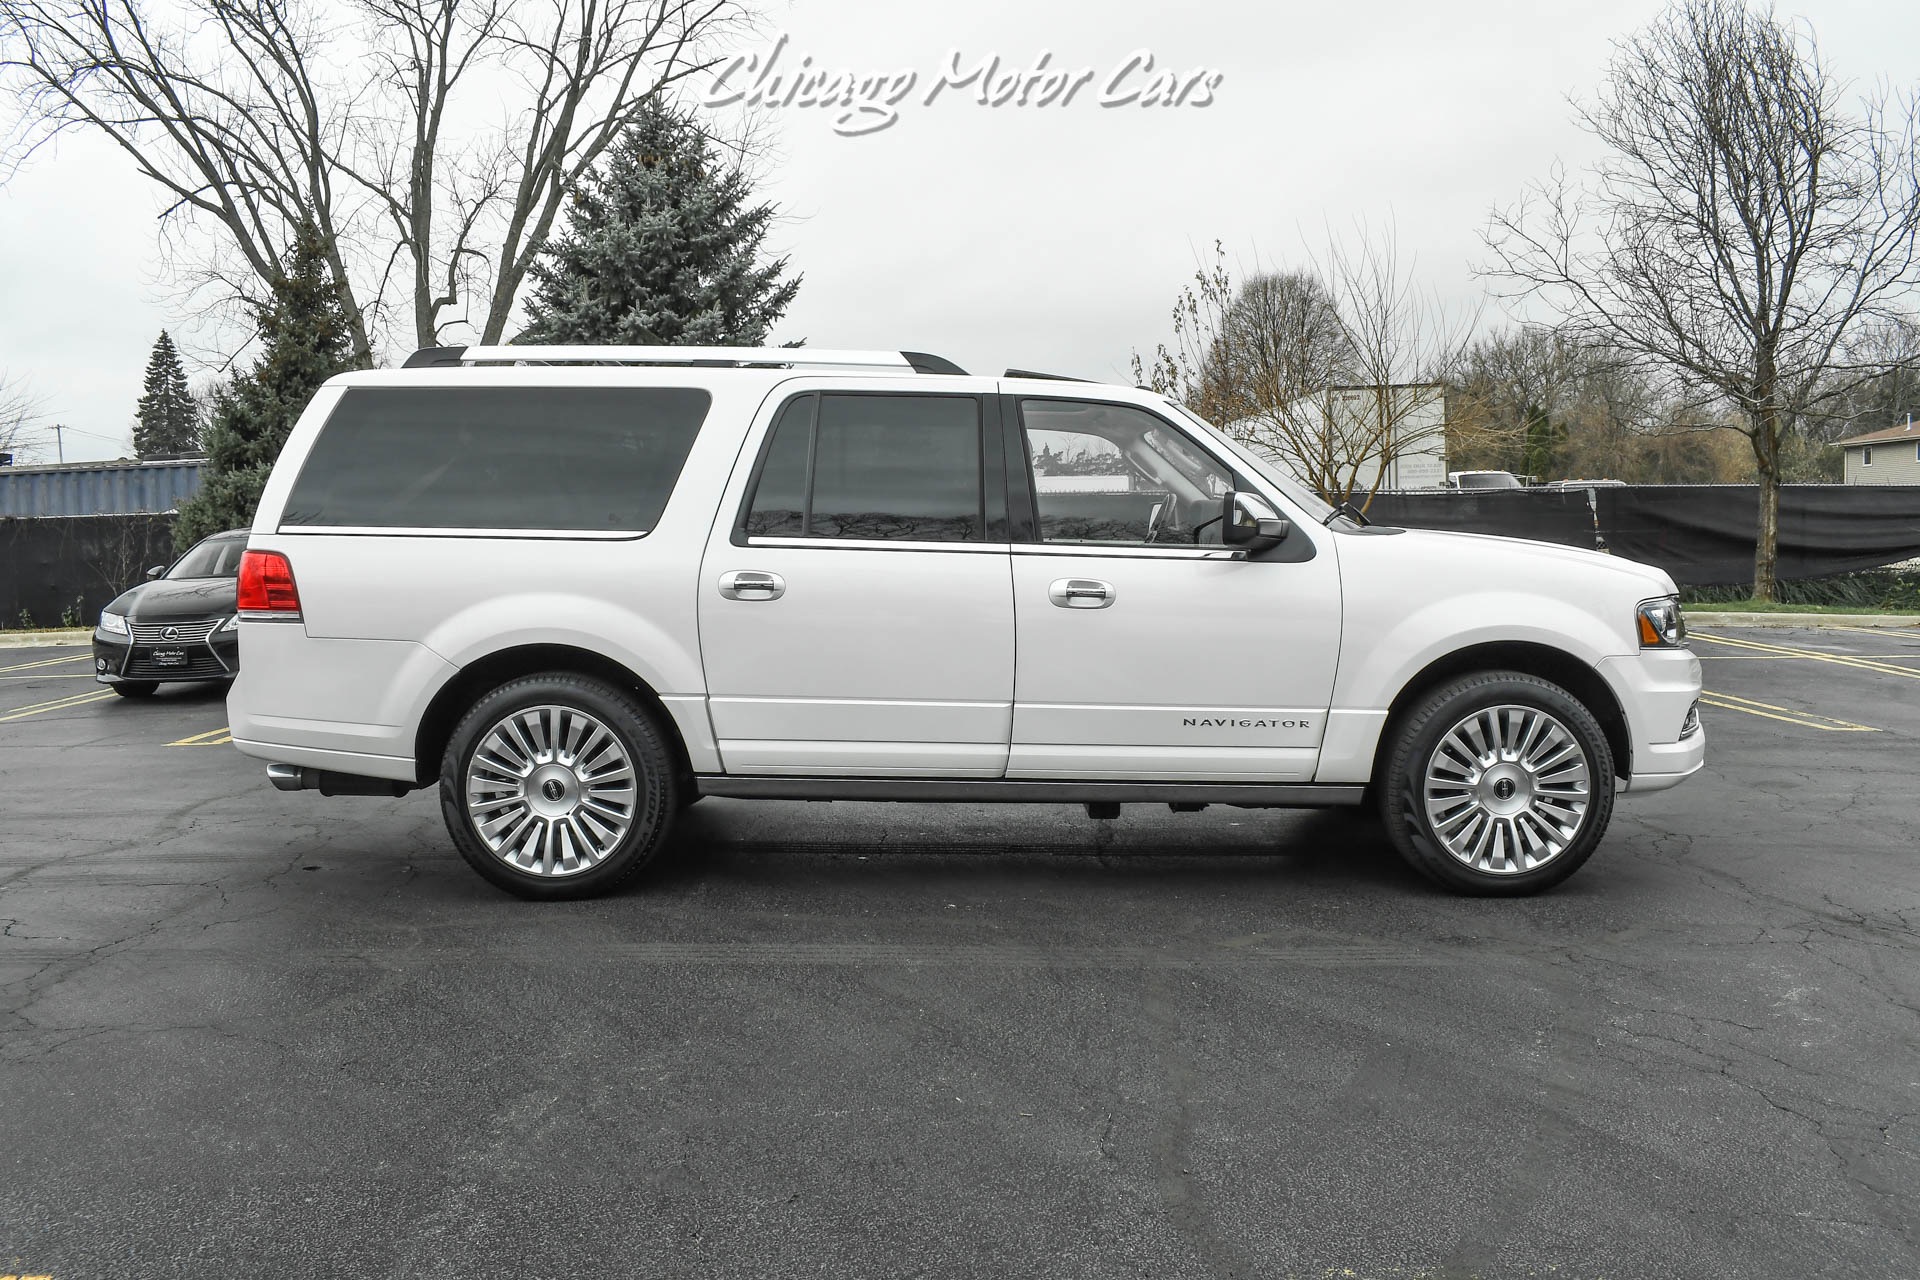 Used-2016-Lincoln-Navigator-L-Reserve-SUV-Special-Tri-Coat-Paint-Heated---Cooled-Seats-Moonroof